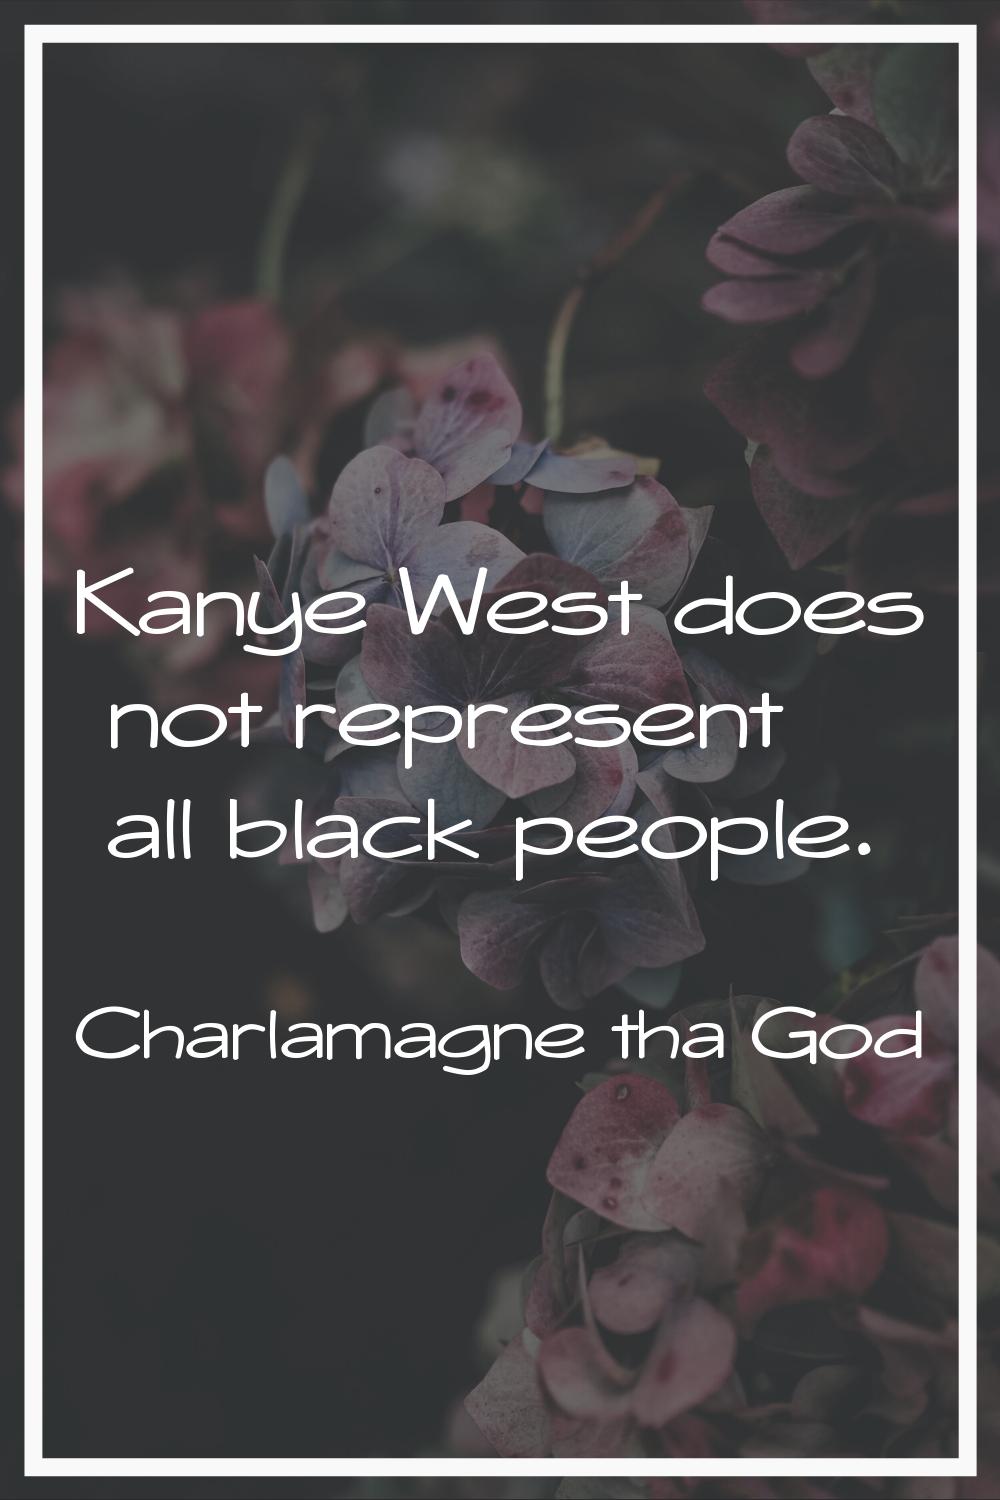 Kanye West does not represent all black people.